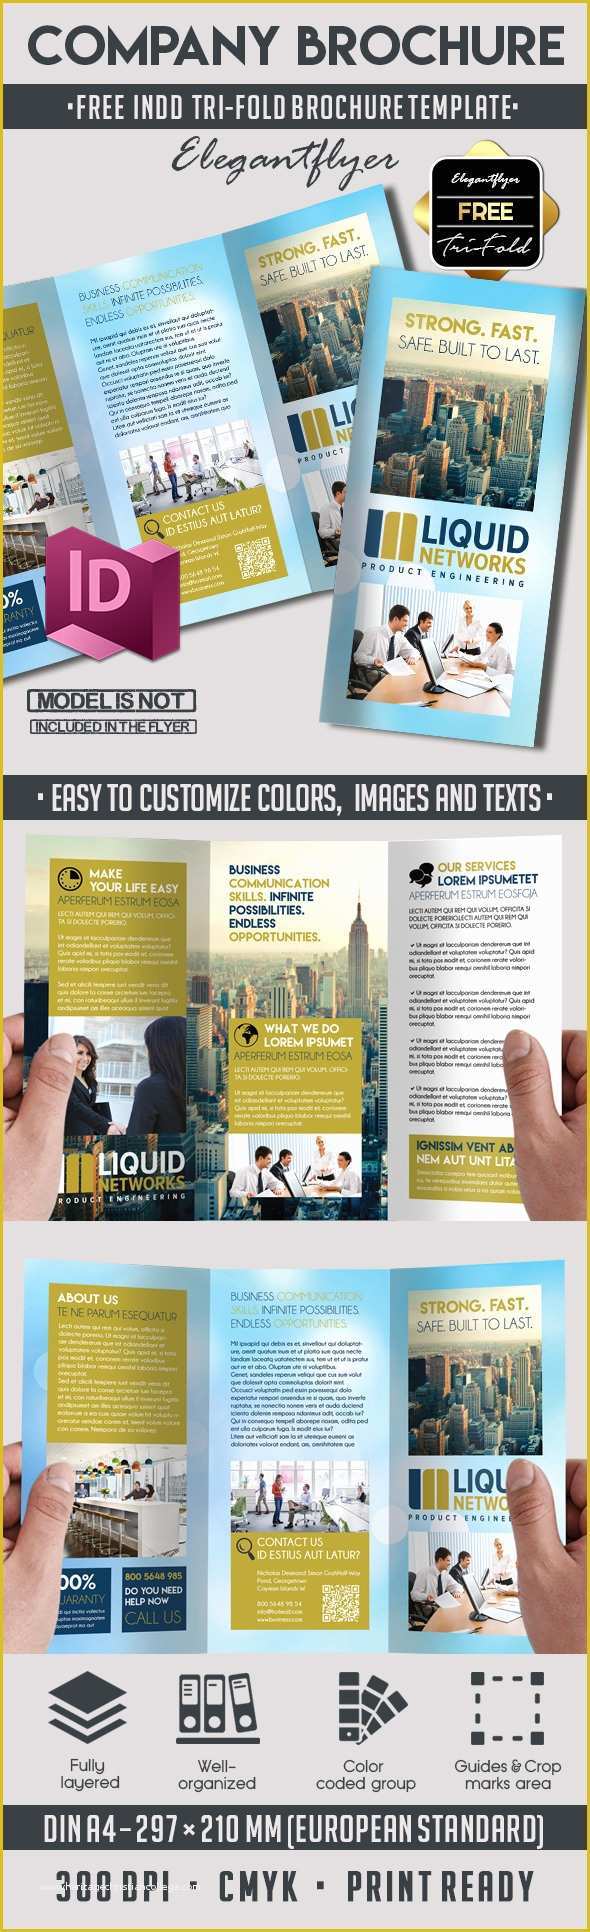 Free Indesign Brochure Templates Of 5 Powerful Free Adobe Indesign Brochures Templates – by